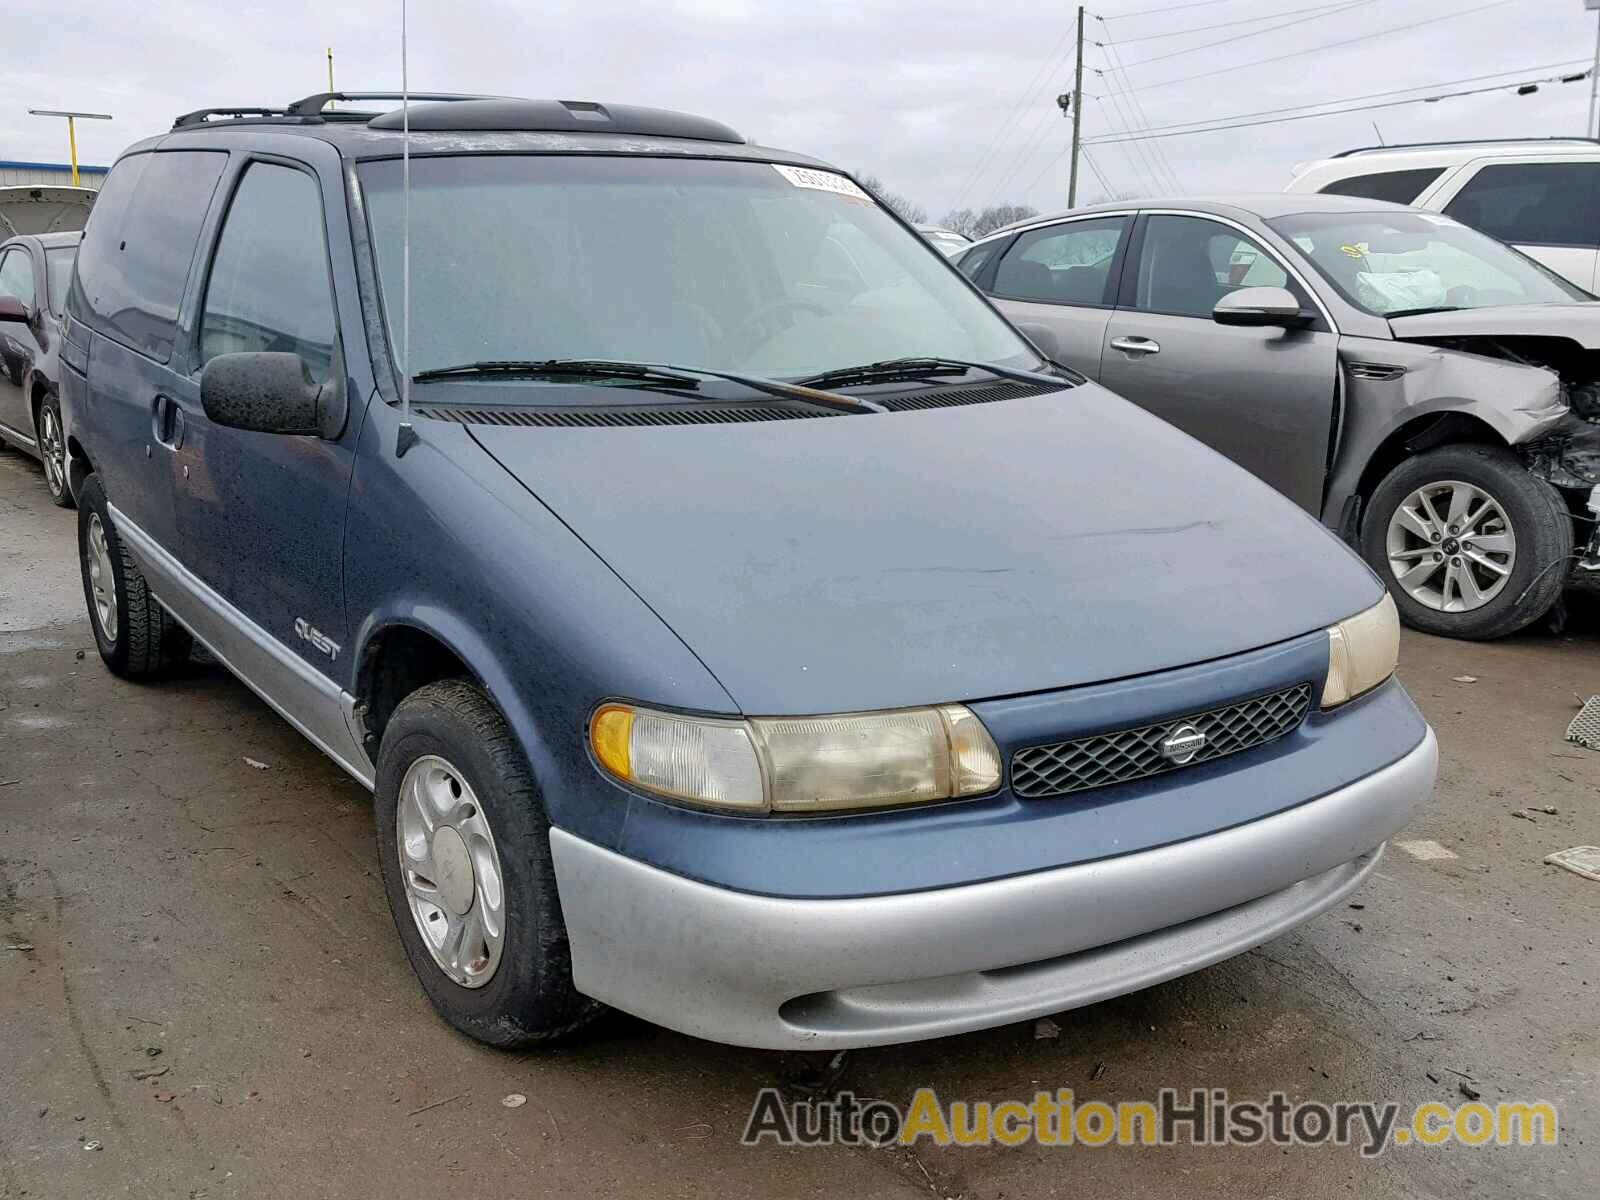 1998 NISSAN QUEST XE, 4N2ZN1113WD809335